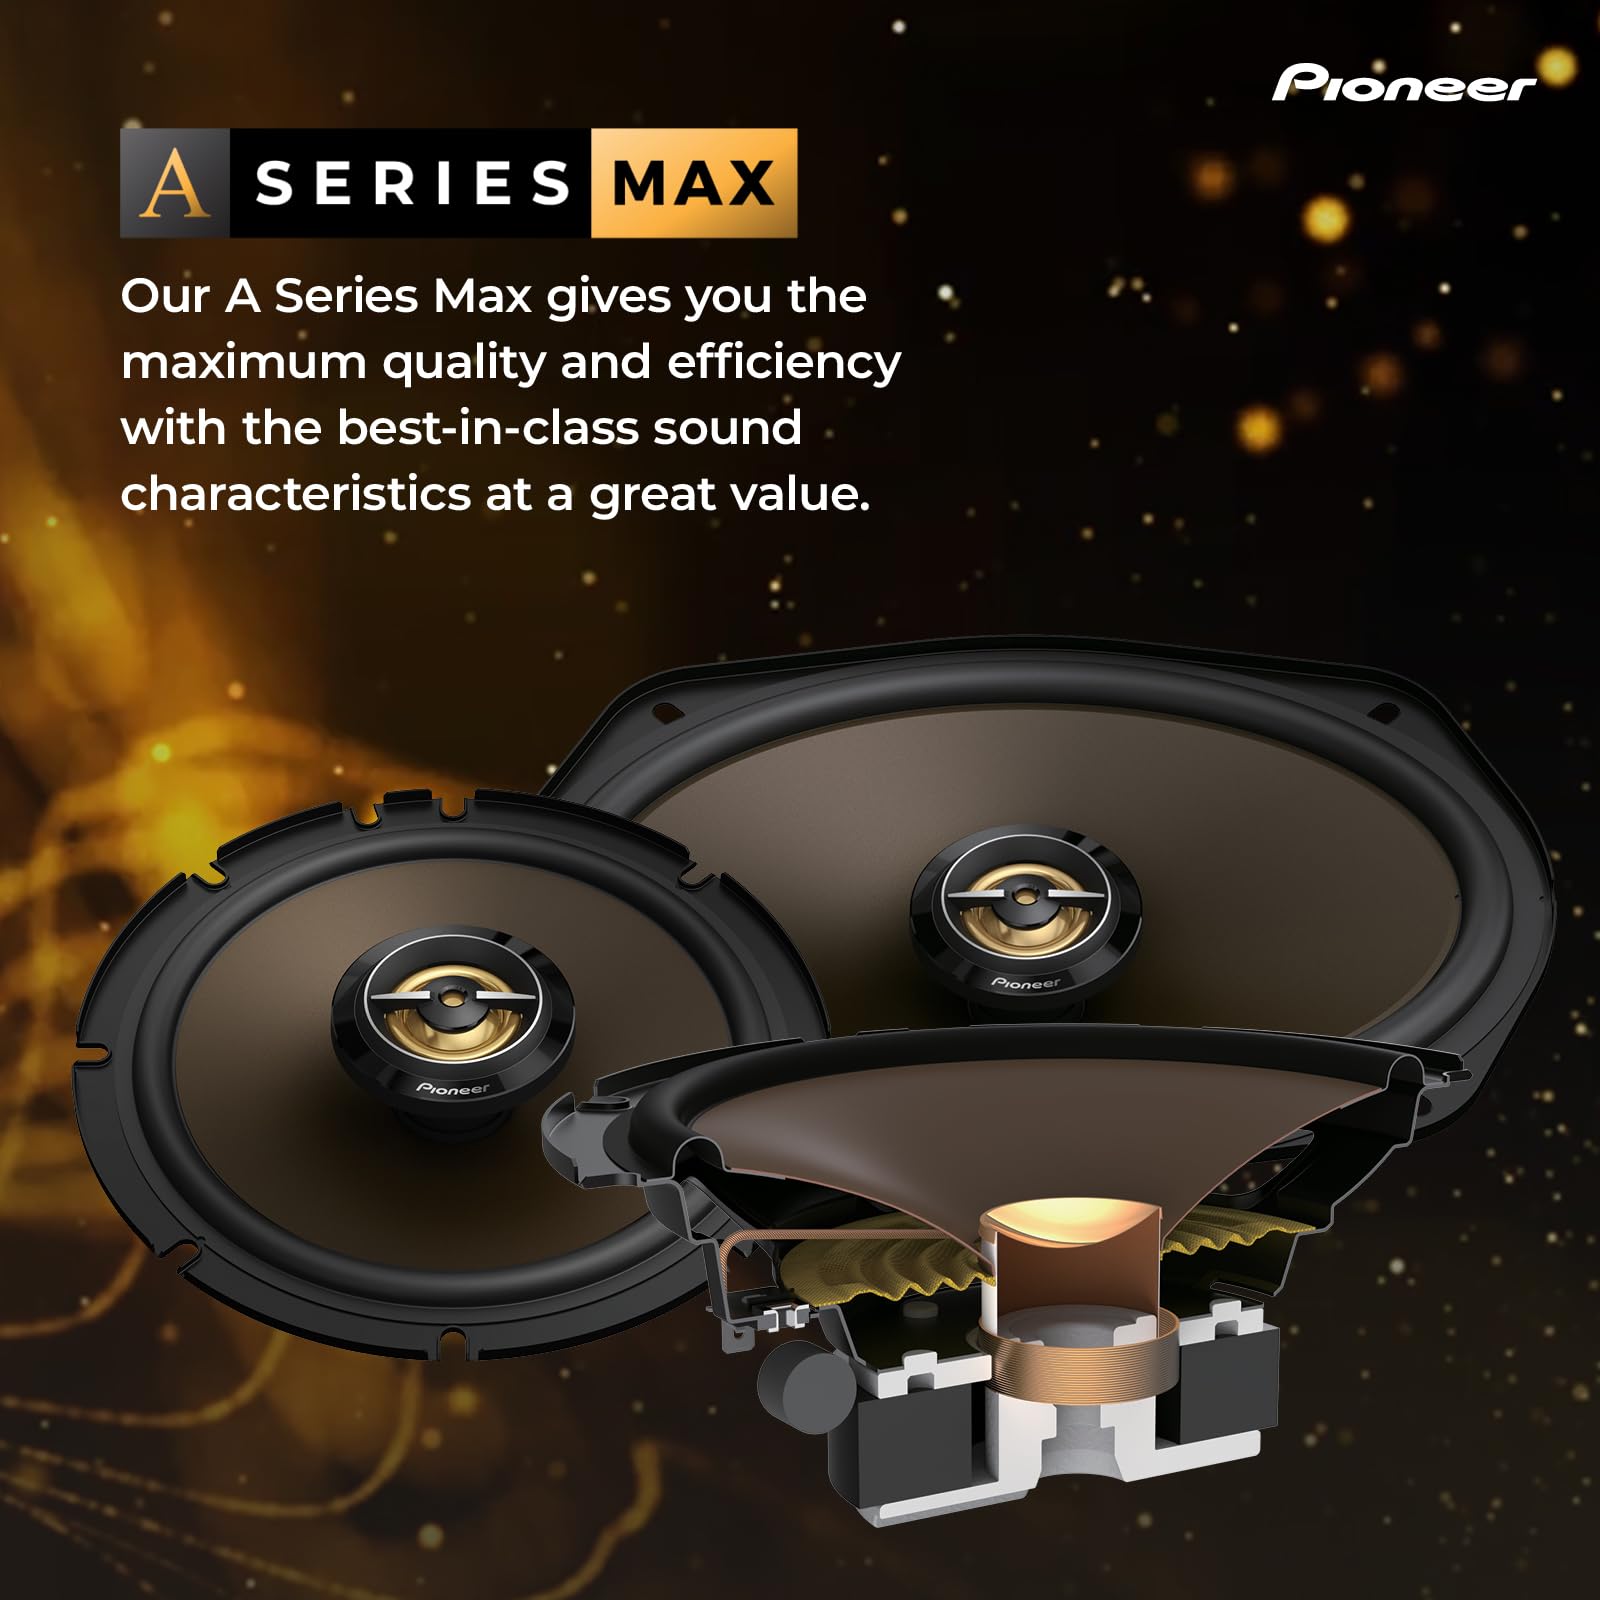 PIONEER A-Series MAX TS-A693FH, 2-Way Coaxial Car Audio Speakers, Full Range, Clear Sound Quality, Easy Installation and Enhanced Bass Response, Full Gold Colored 6” x 9” Oval Speakers